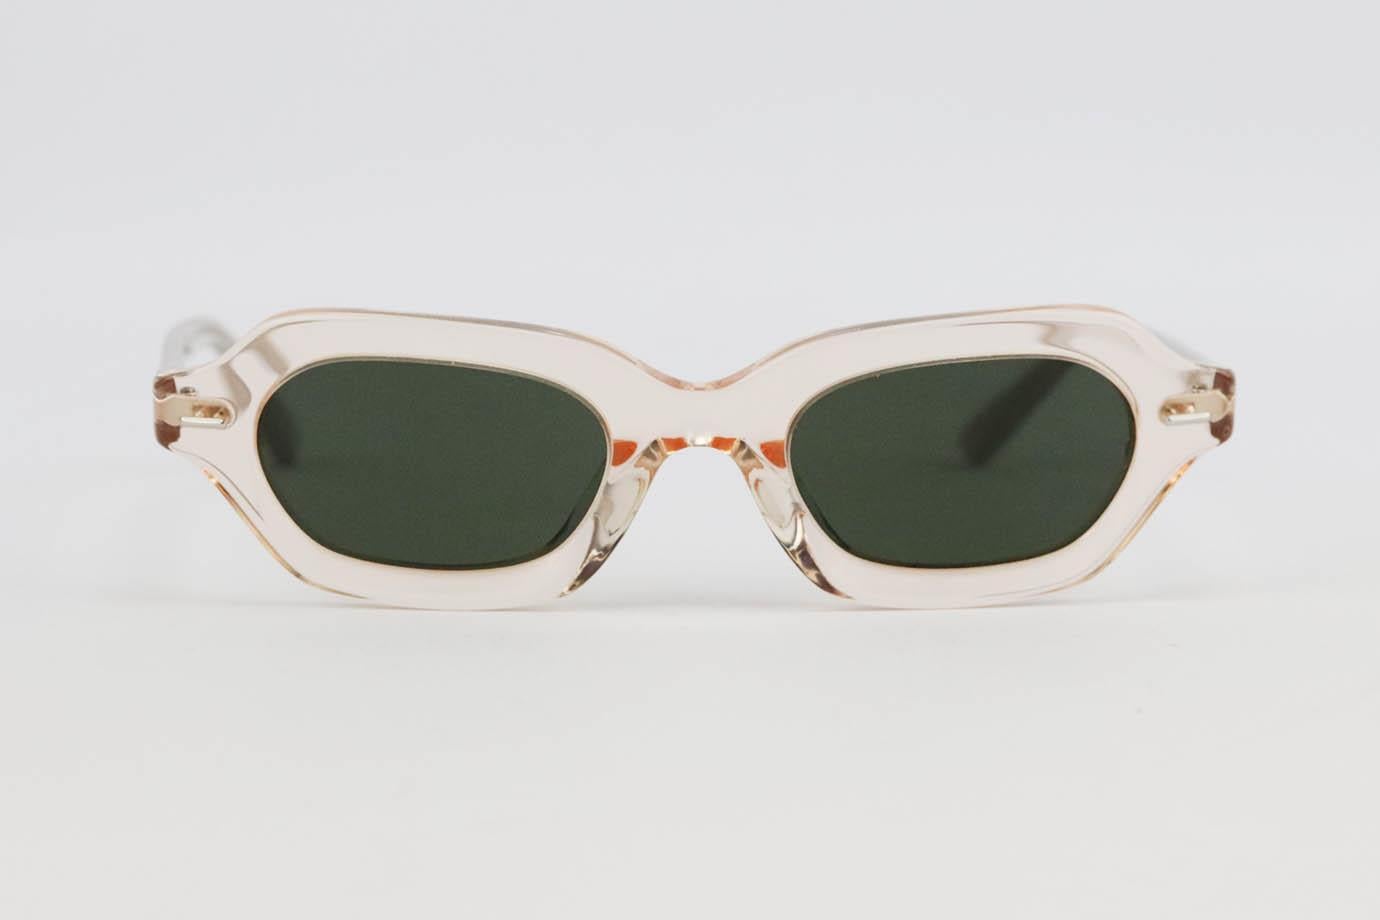 The Row + Oliver Peoples hexagonal frame acetate sunglasses. Peach. Does not come with case. Style code: OV5386SU 1652P1. Lens size: 47 mm. Arm size: 145 mm. Bridge size: 22 mm
